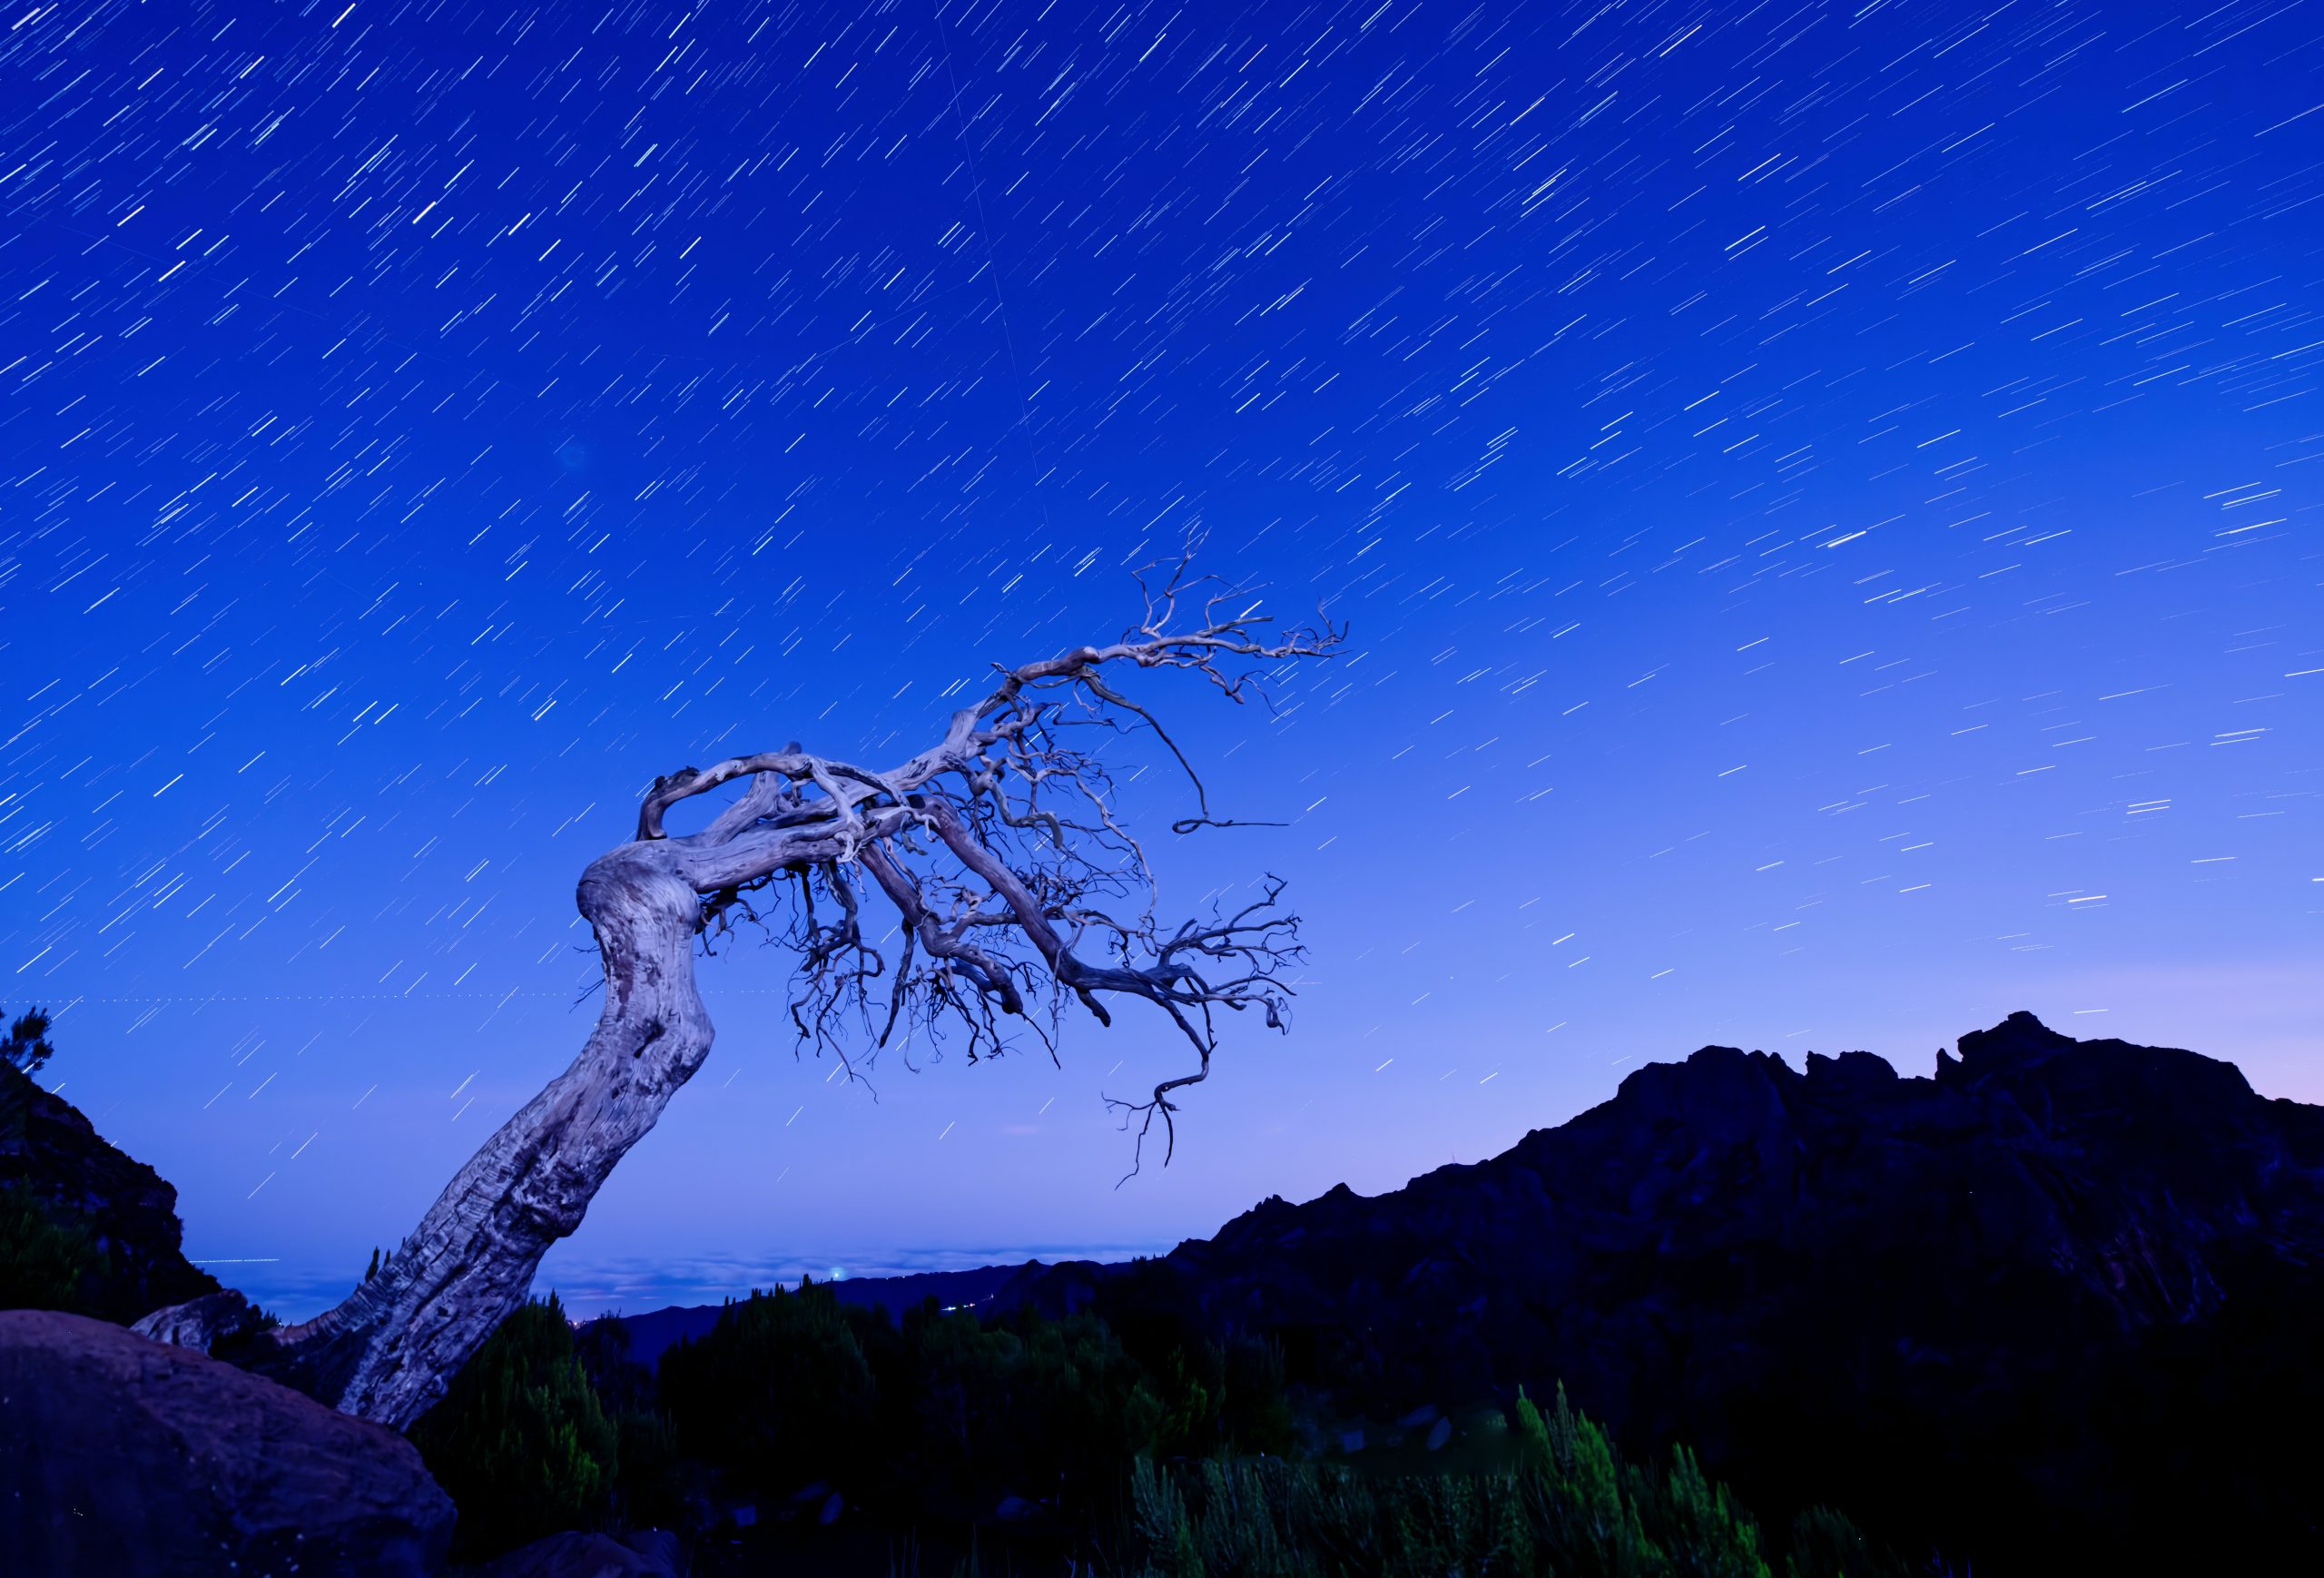 Stars with a tree in the foreground